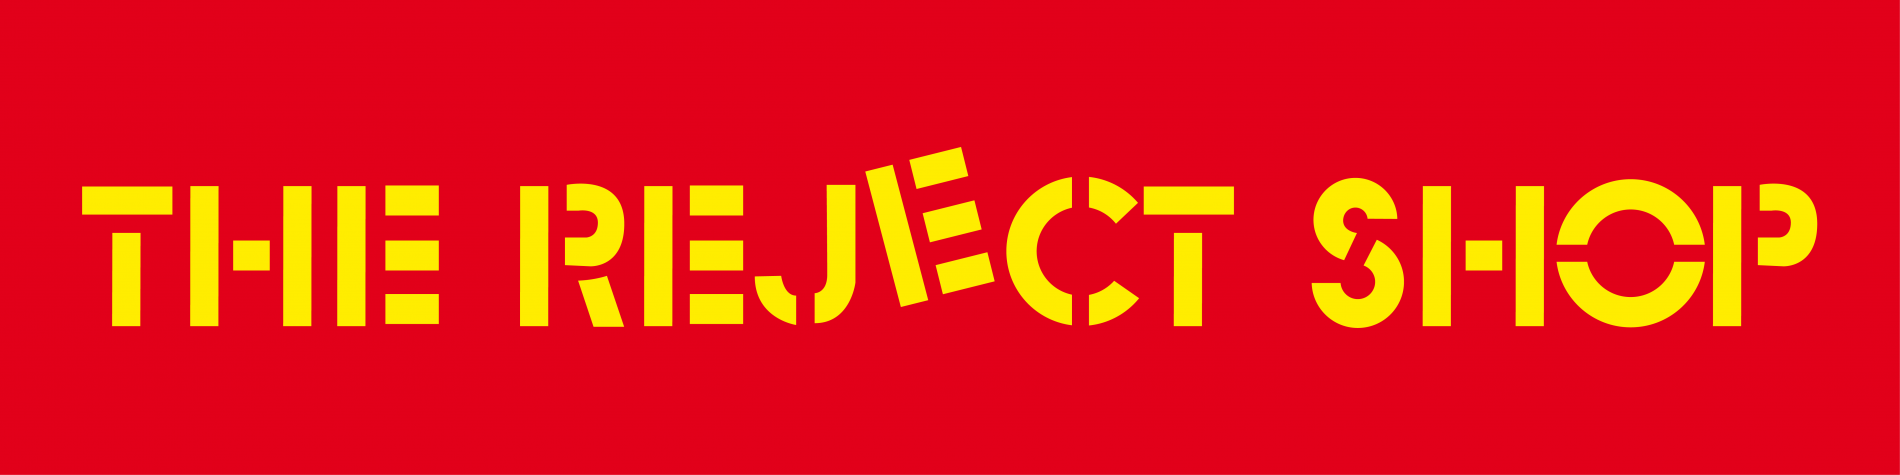 The Reject Shop Limited logo.